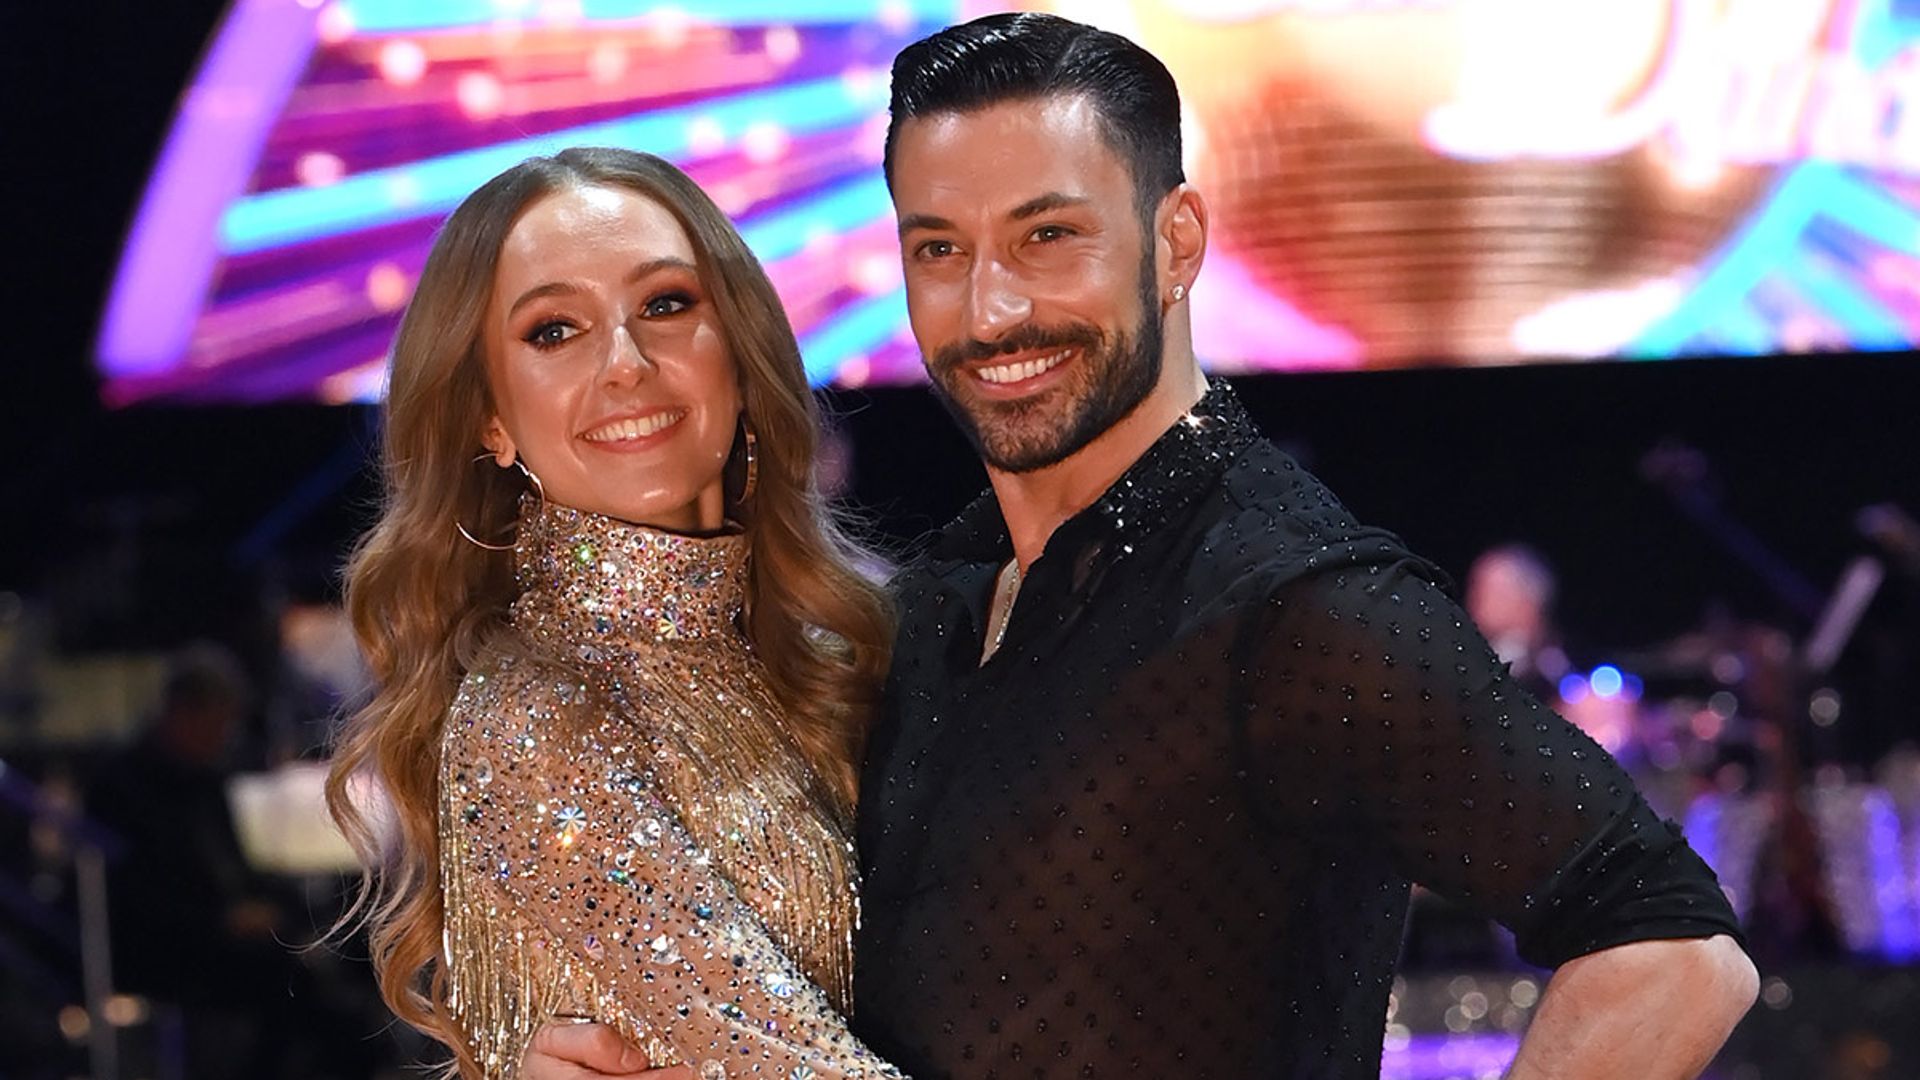 Strictly's Rose Ayling-Ellis and Giovanni Pernice cosy up for new snaps ahead of tour debut